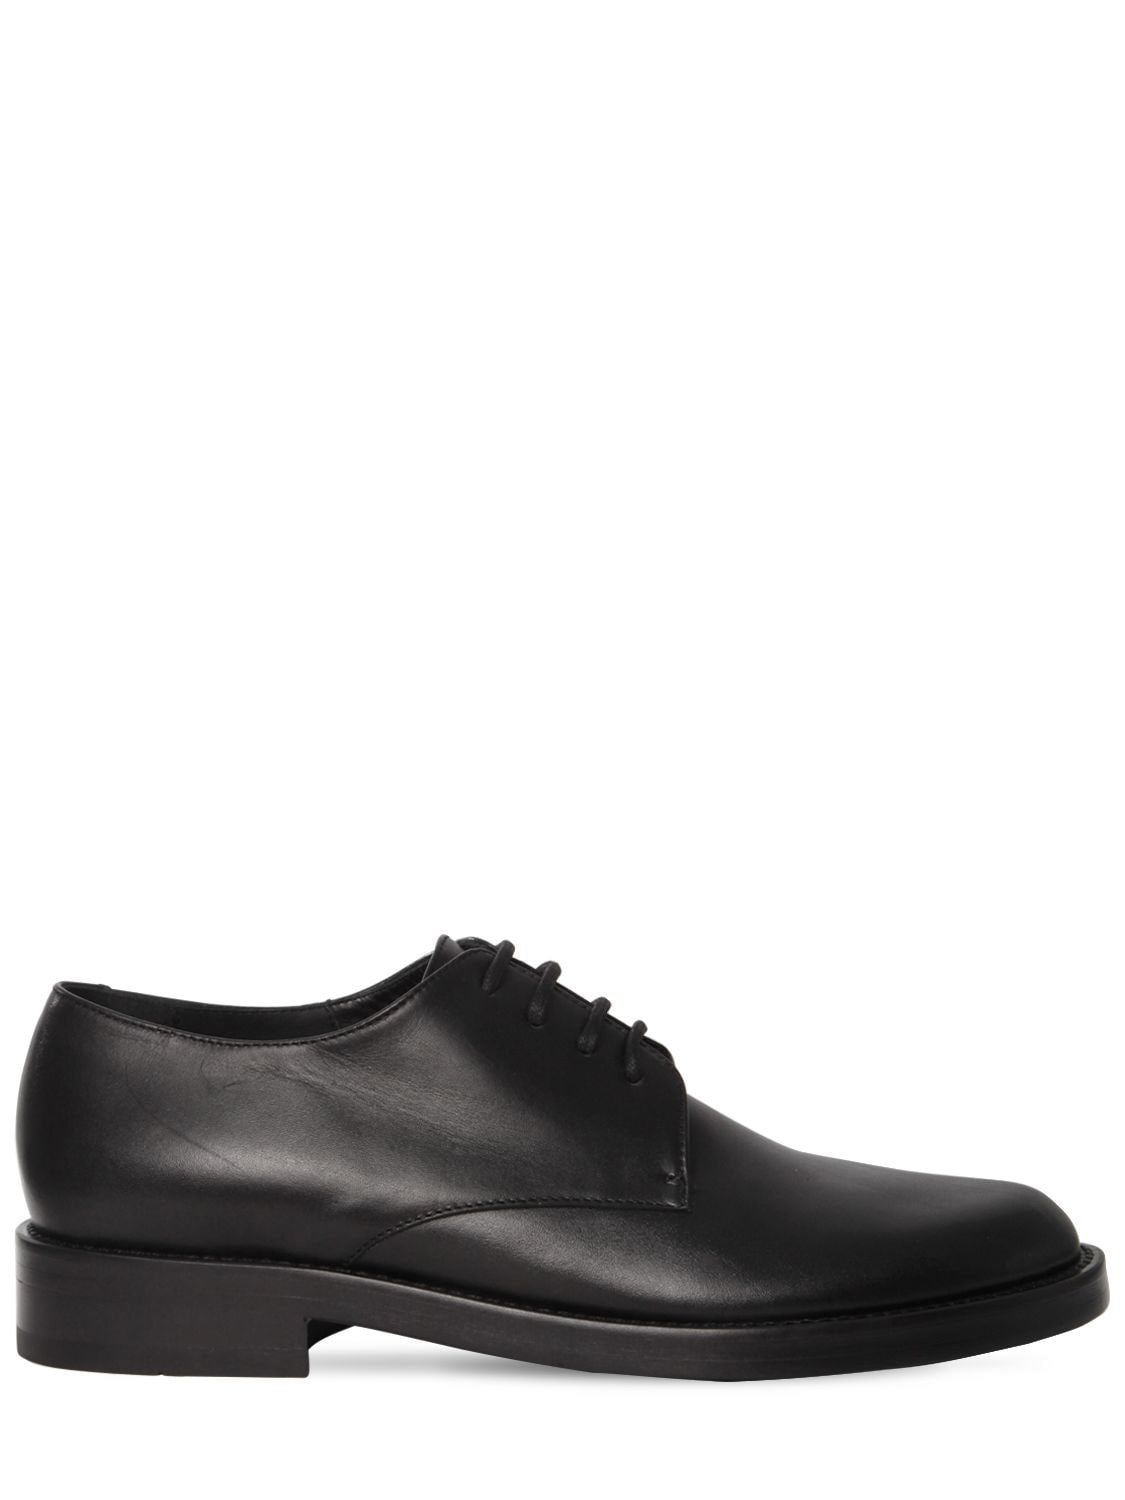 ANN DEMEULEMEESTER 30MM LEATHER LACE-UP SHOES,72IA5I004-MDK50